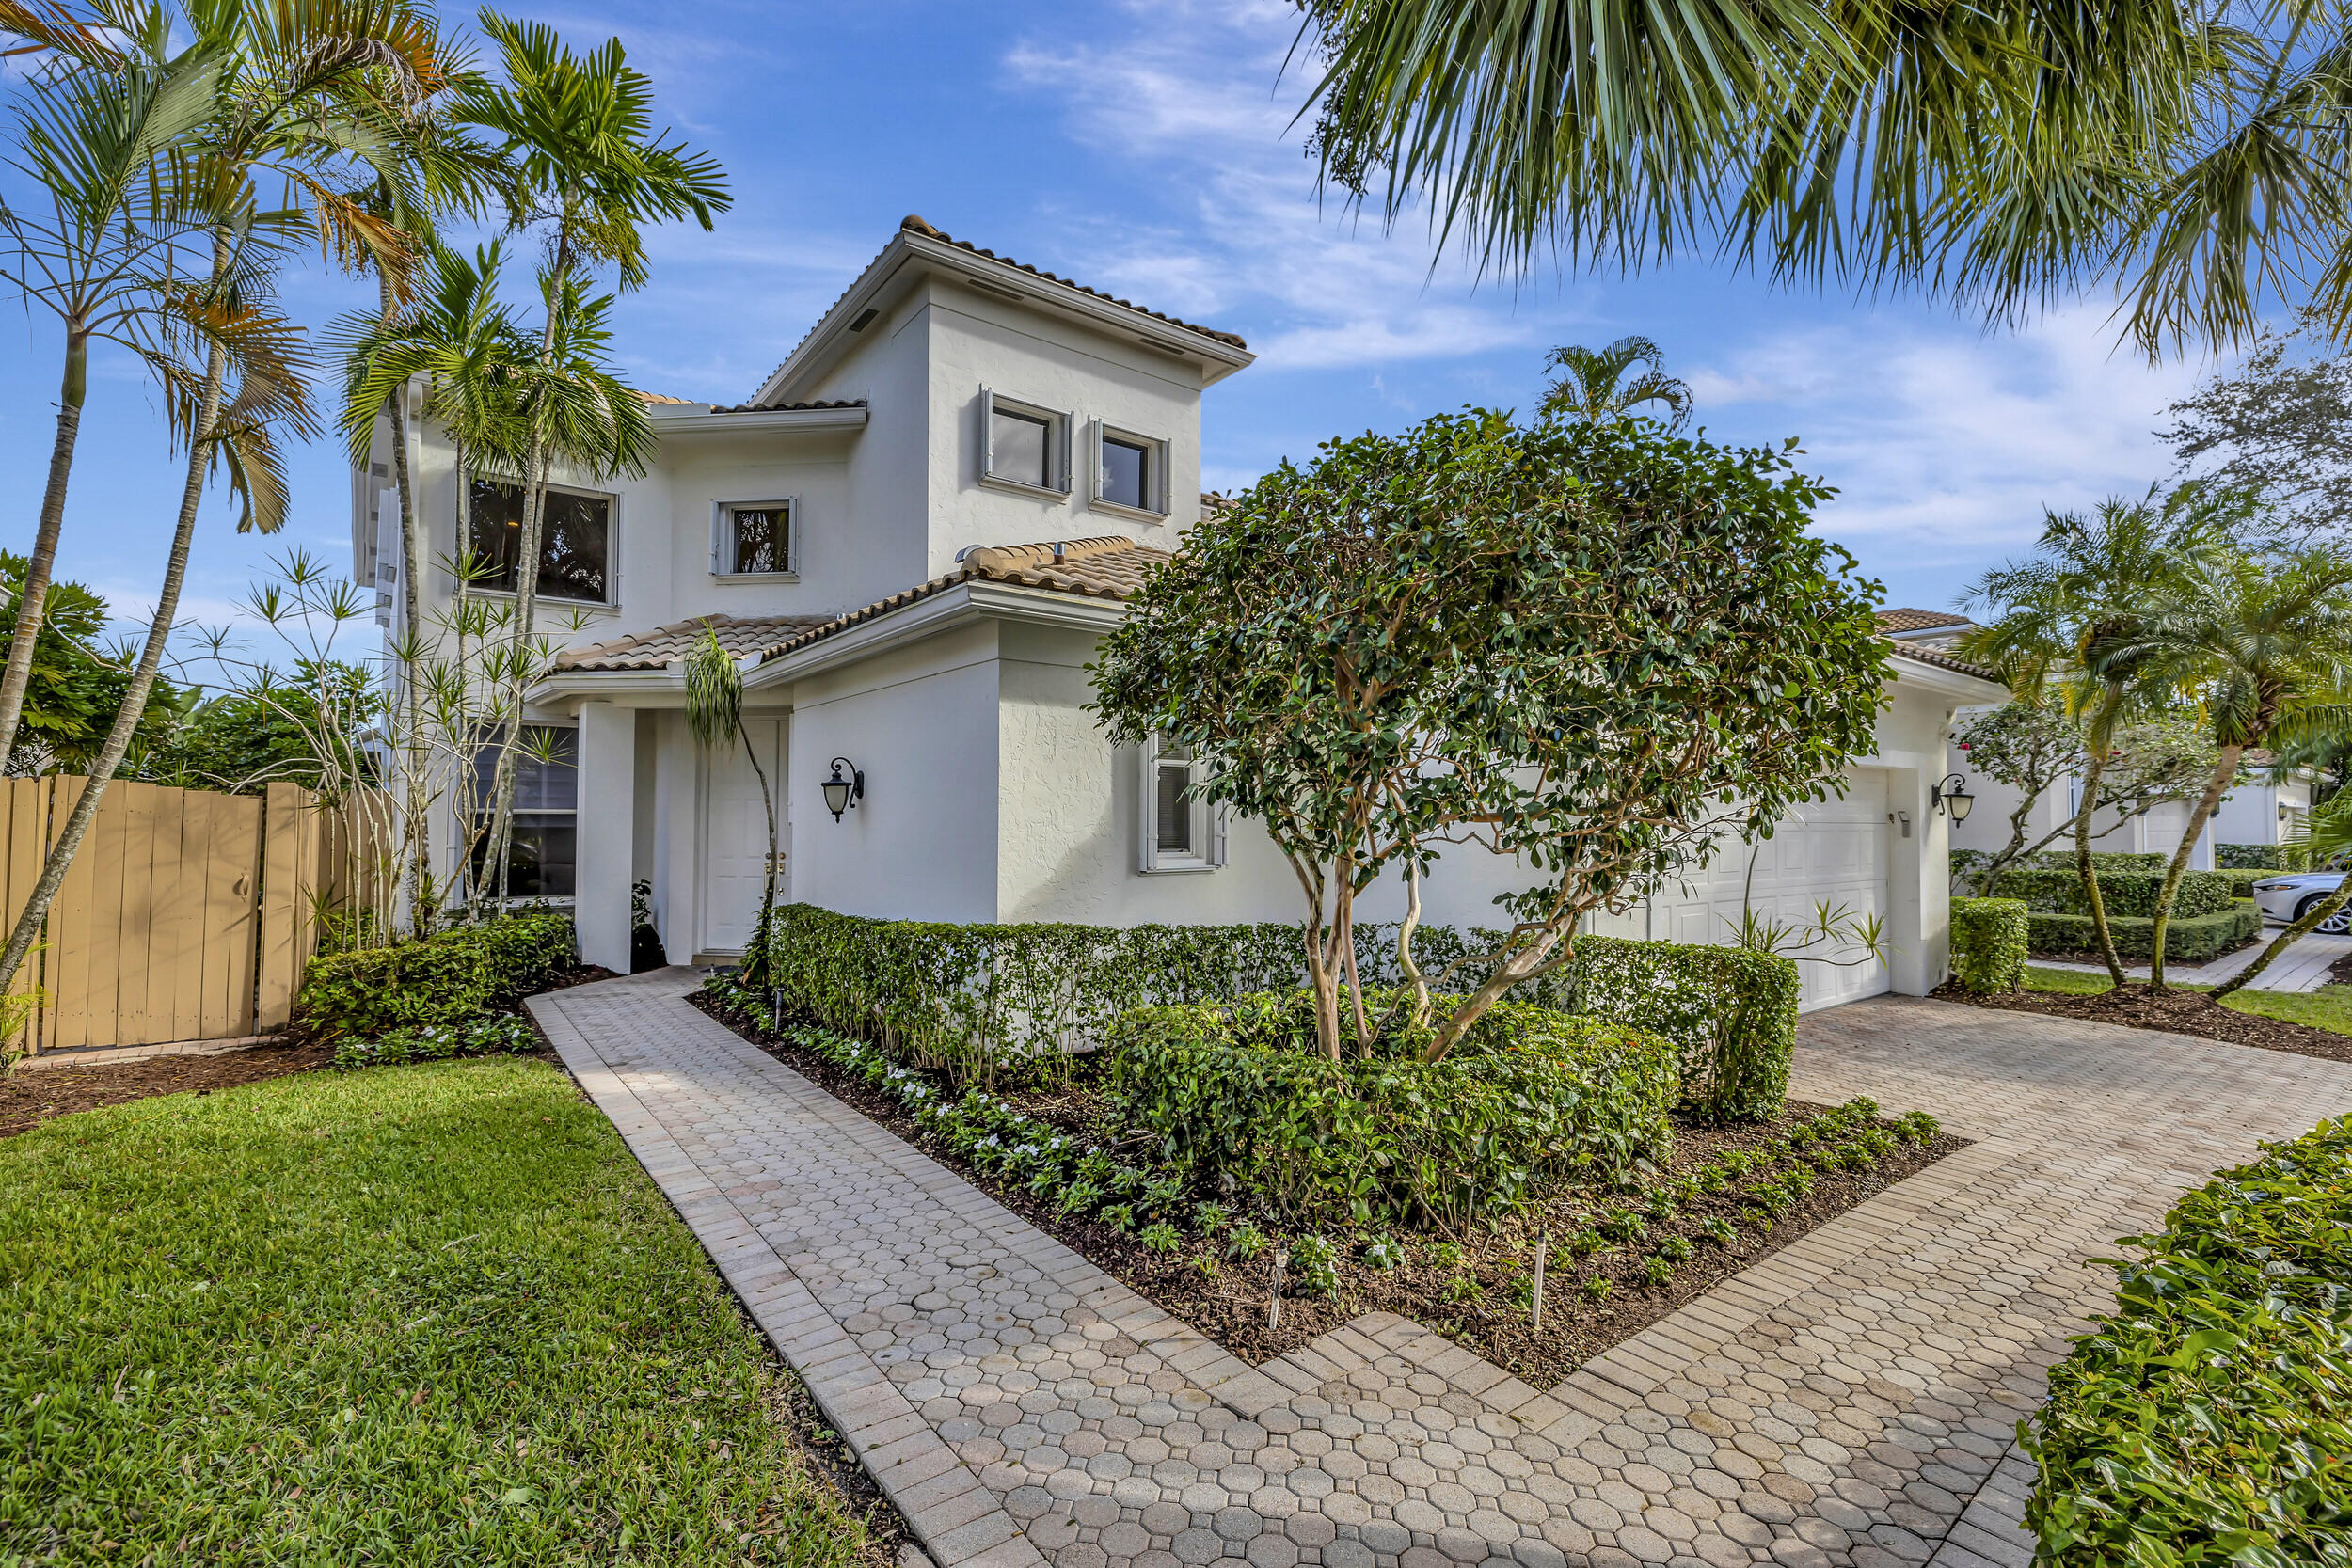 Property for Sale at 6650 Nw 24th Terrace, Boca Raton, Palm Beach County, Florida - Bedrooms: 4 
Bathrooms: 3.5  - $1,050,000